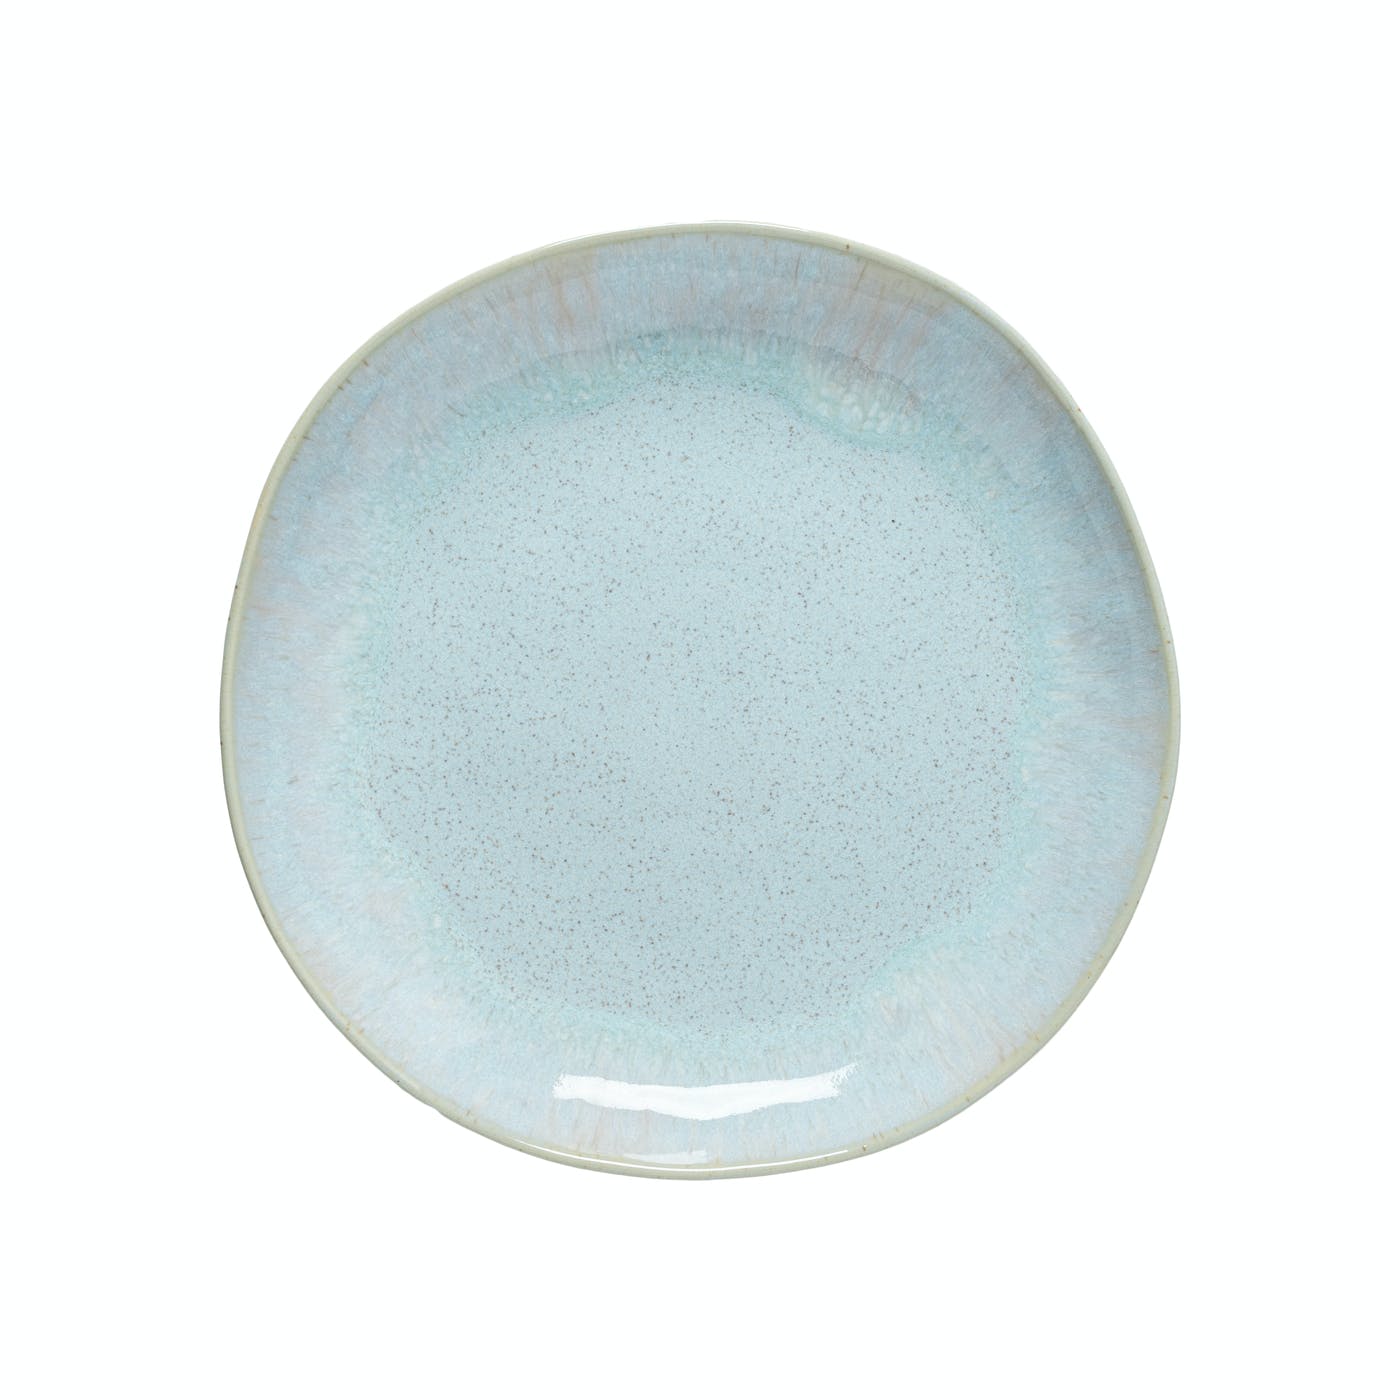 Circular light blue ceramic plate with speckled pattern and glossy finish on a white background.